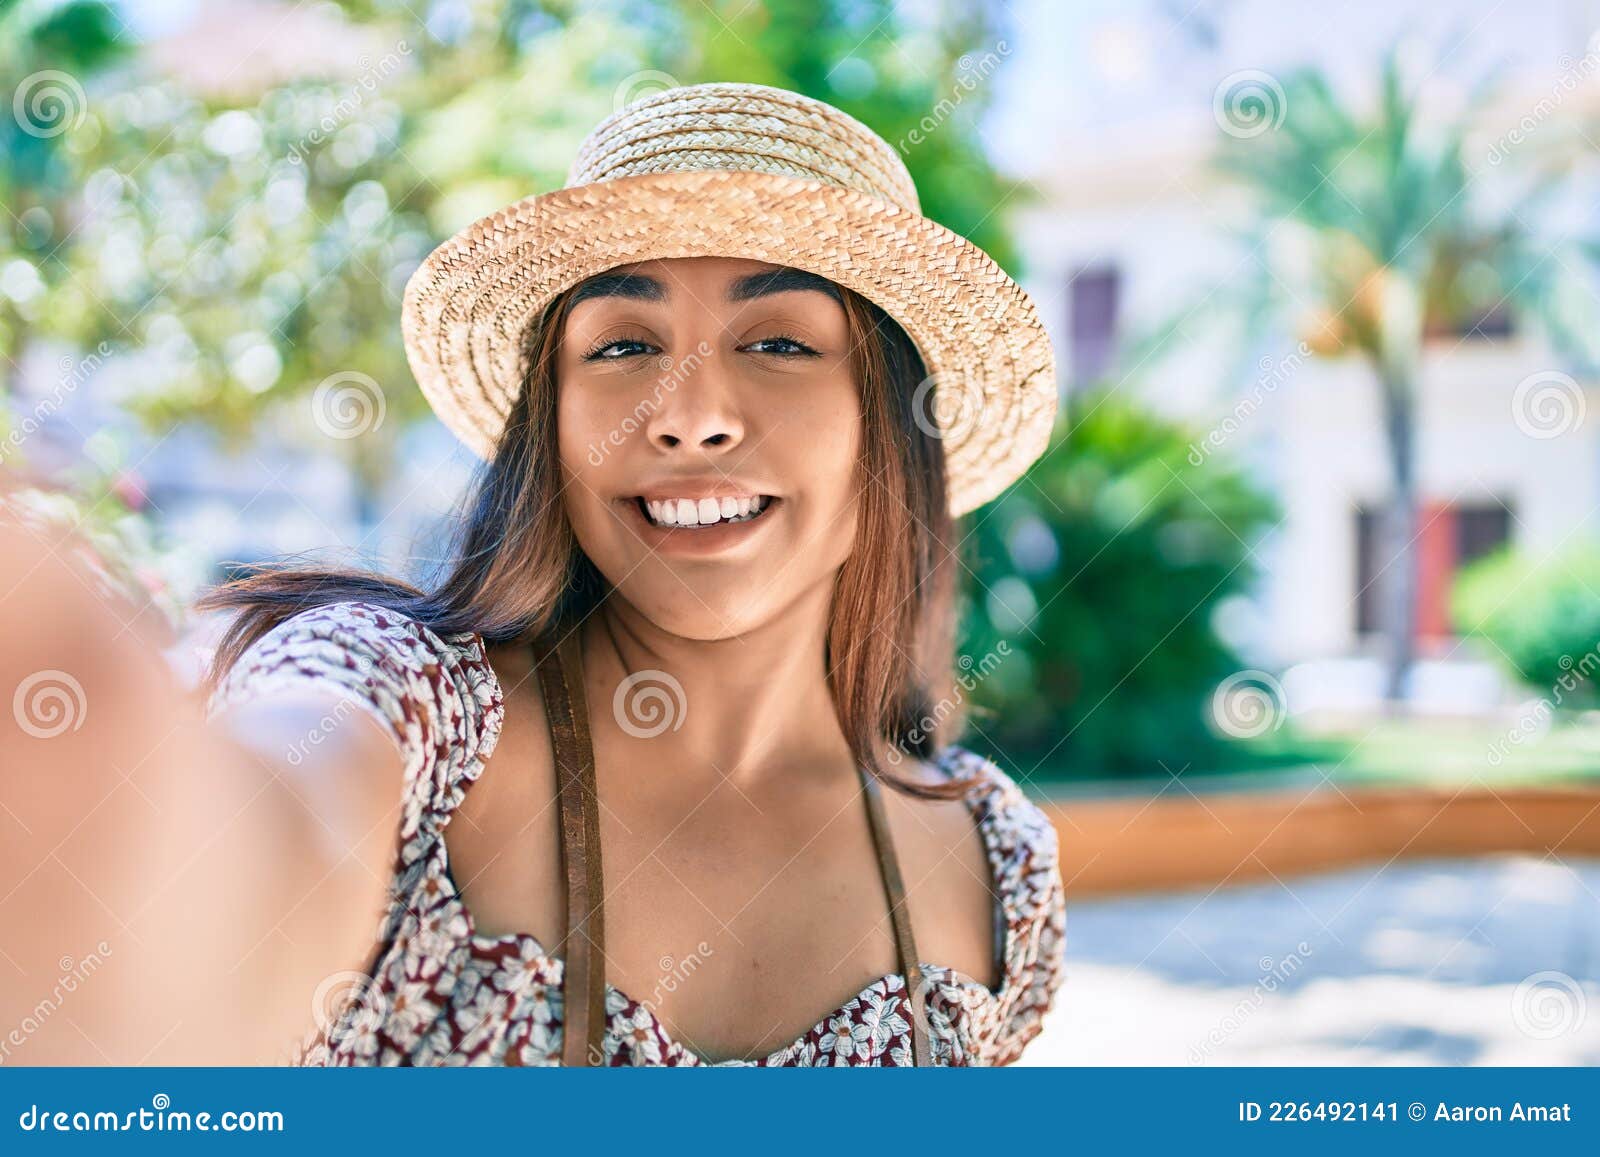 Young Latin Woman on Vacation Smiling Happy Making Selfie by the Camera ...